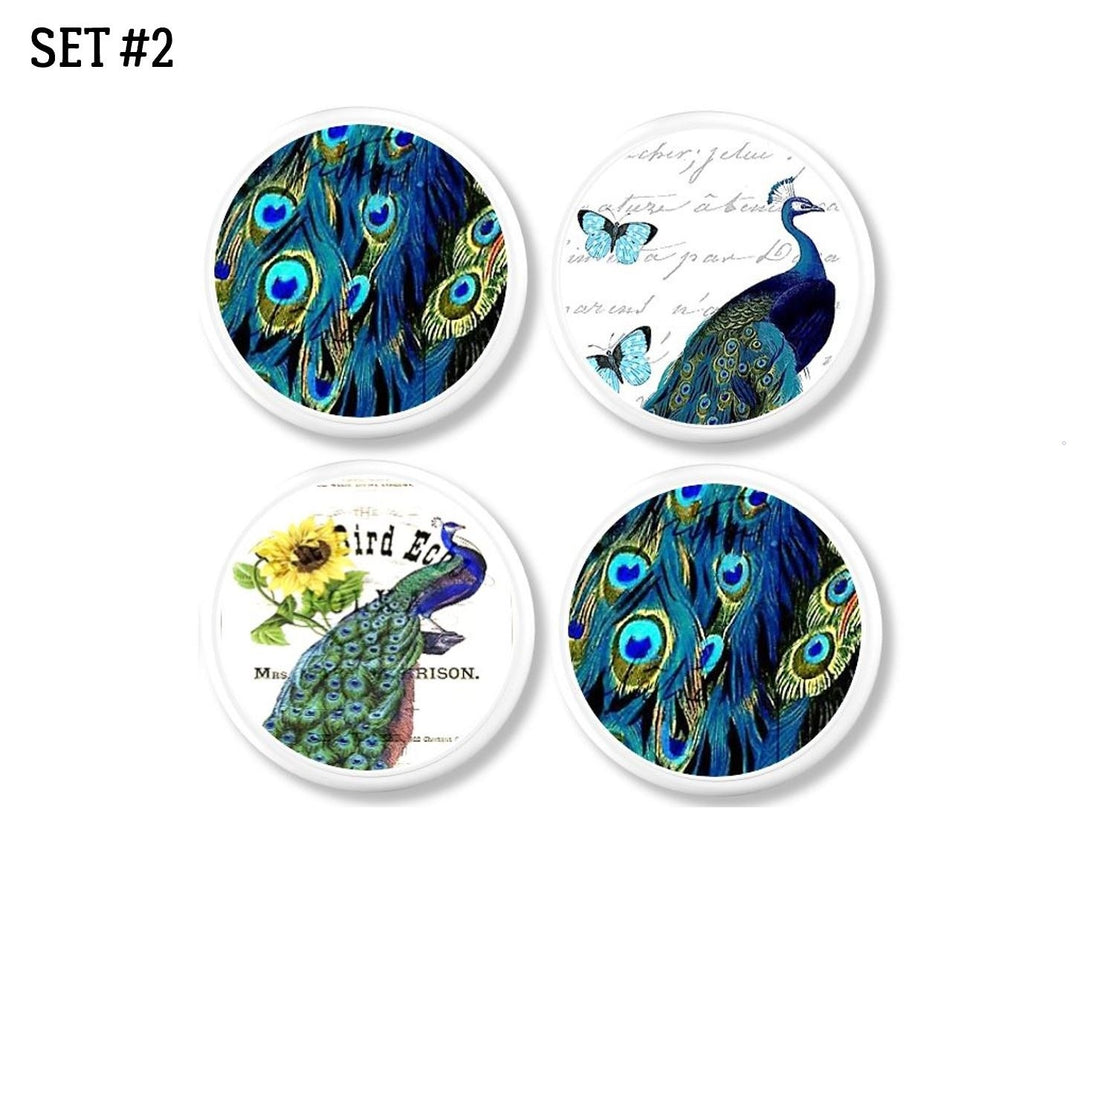 4 Furniture door pulls decorated with peacock and feathers with butterfly and sunflower on french postcard. Colors are deep blue, turquoise and yellow.